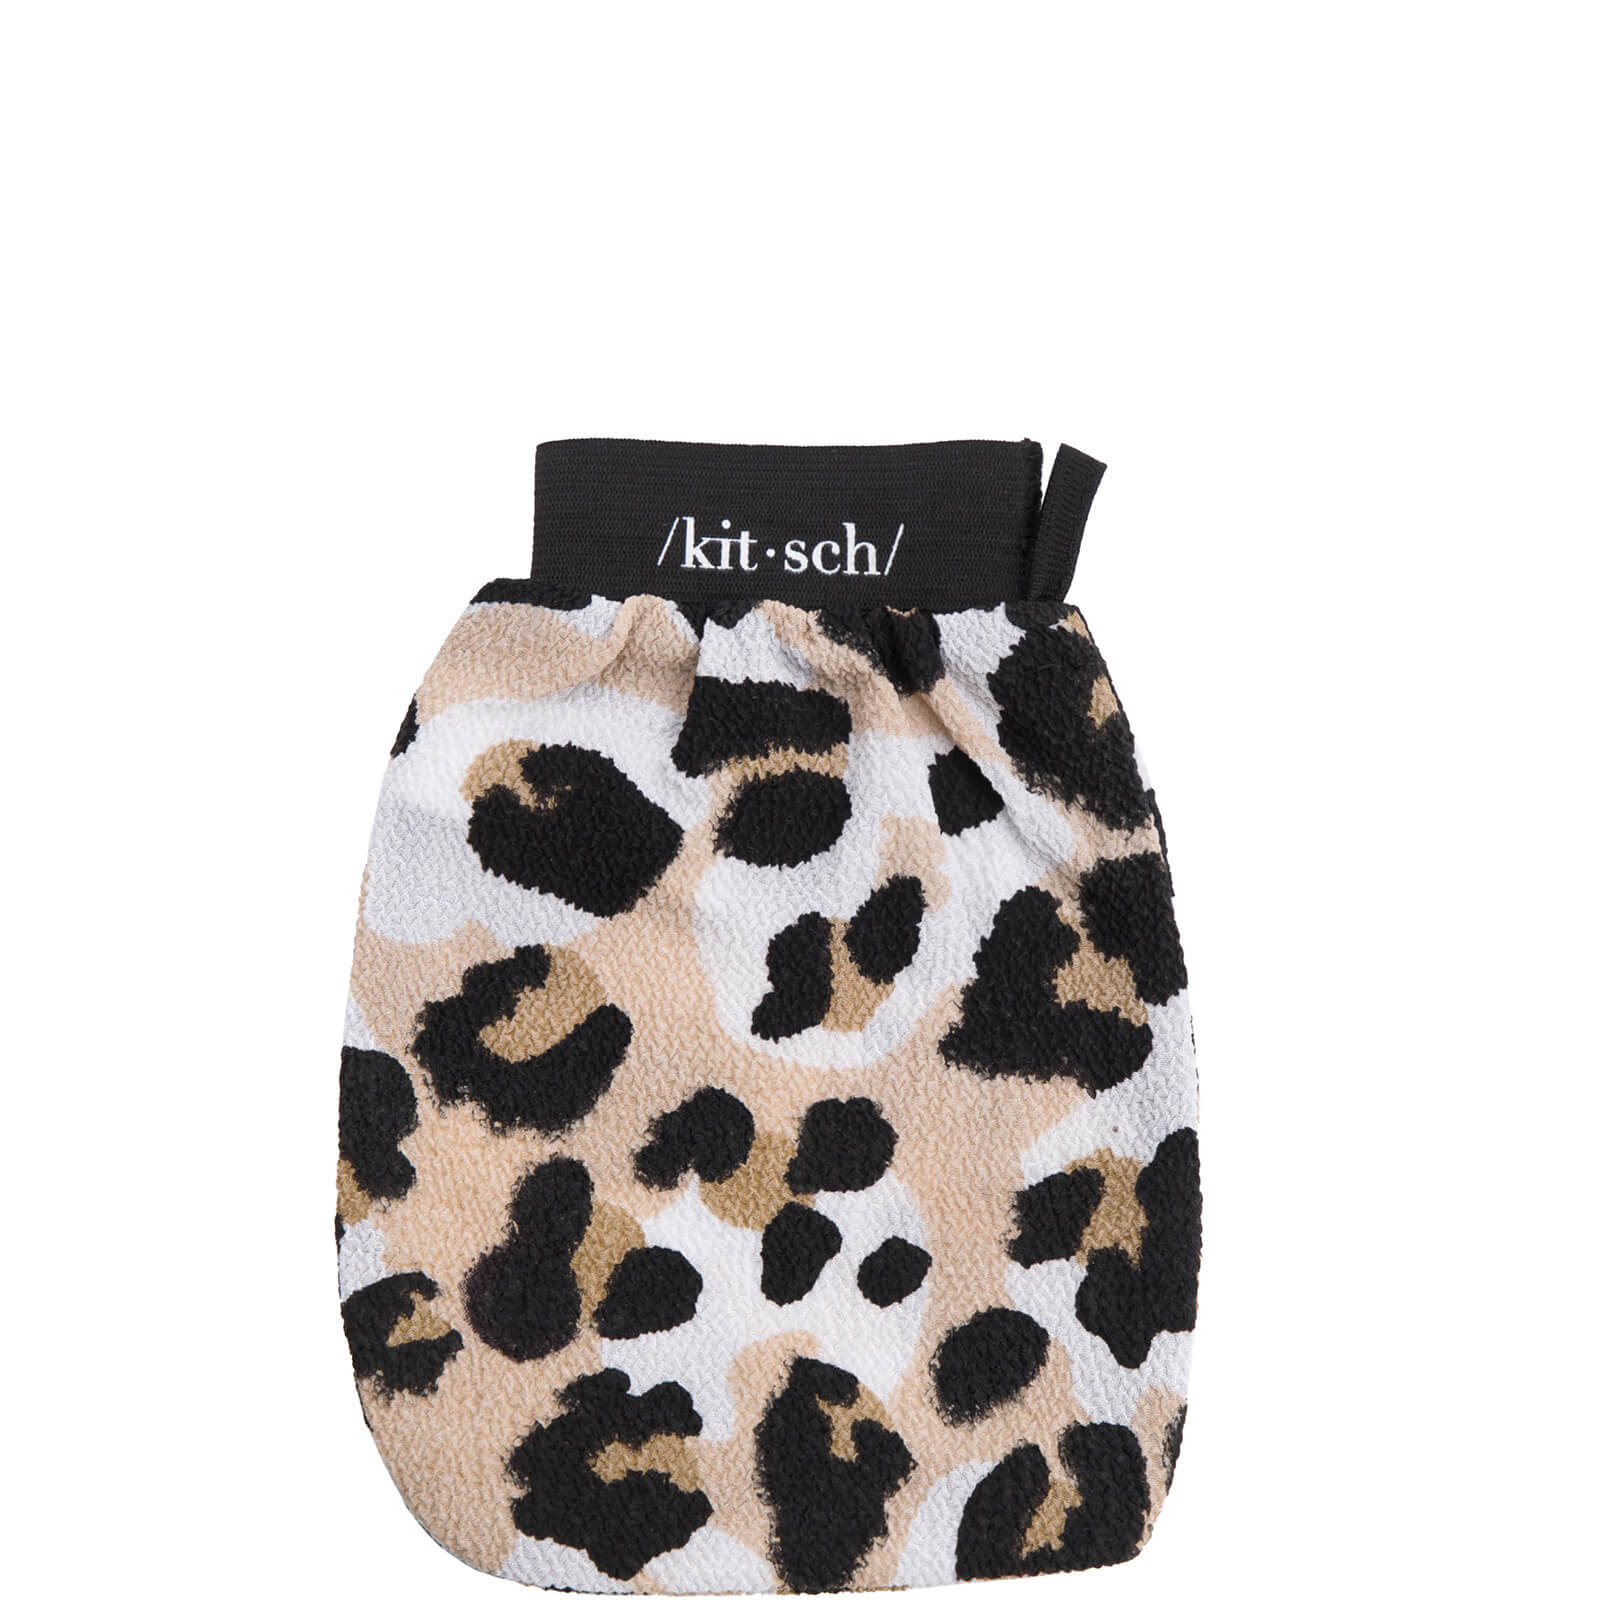 Kitsch Eco-Friendly Exfoliating Glove (Various Options) - Leopard